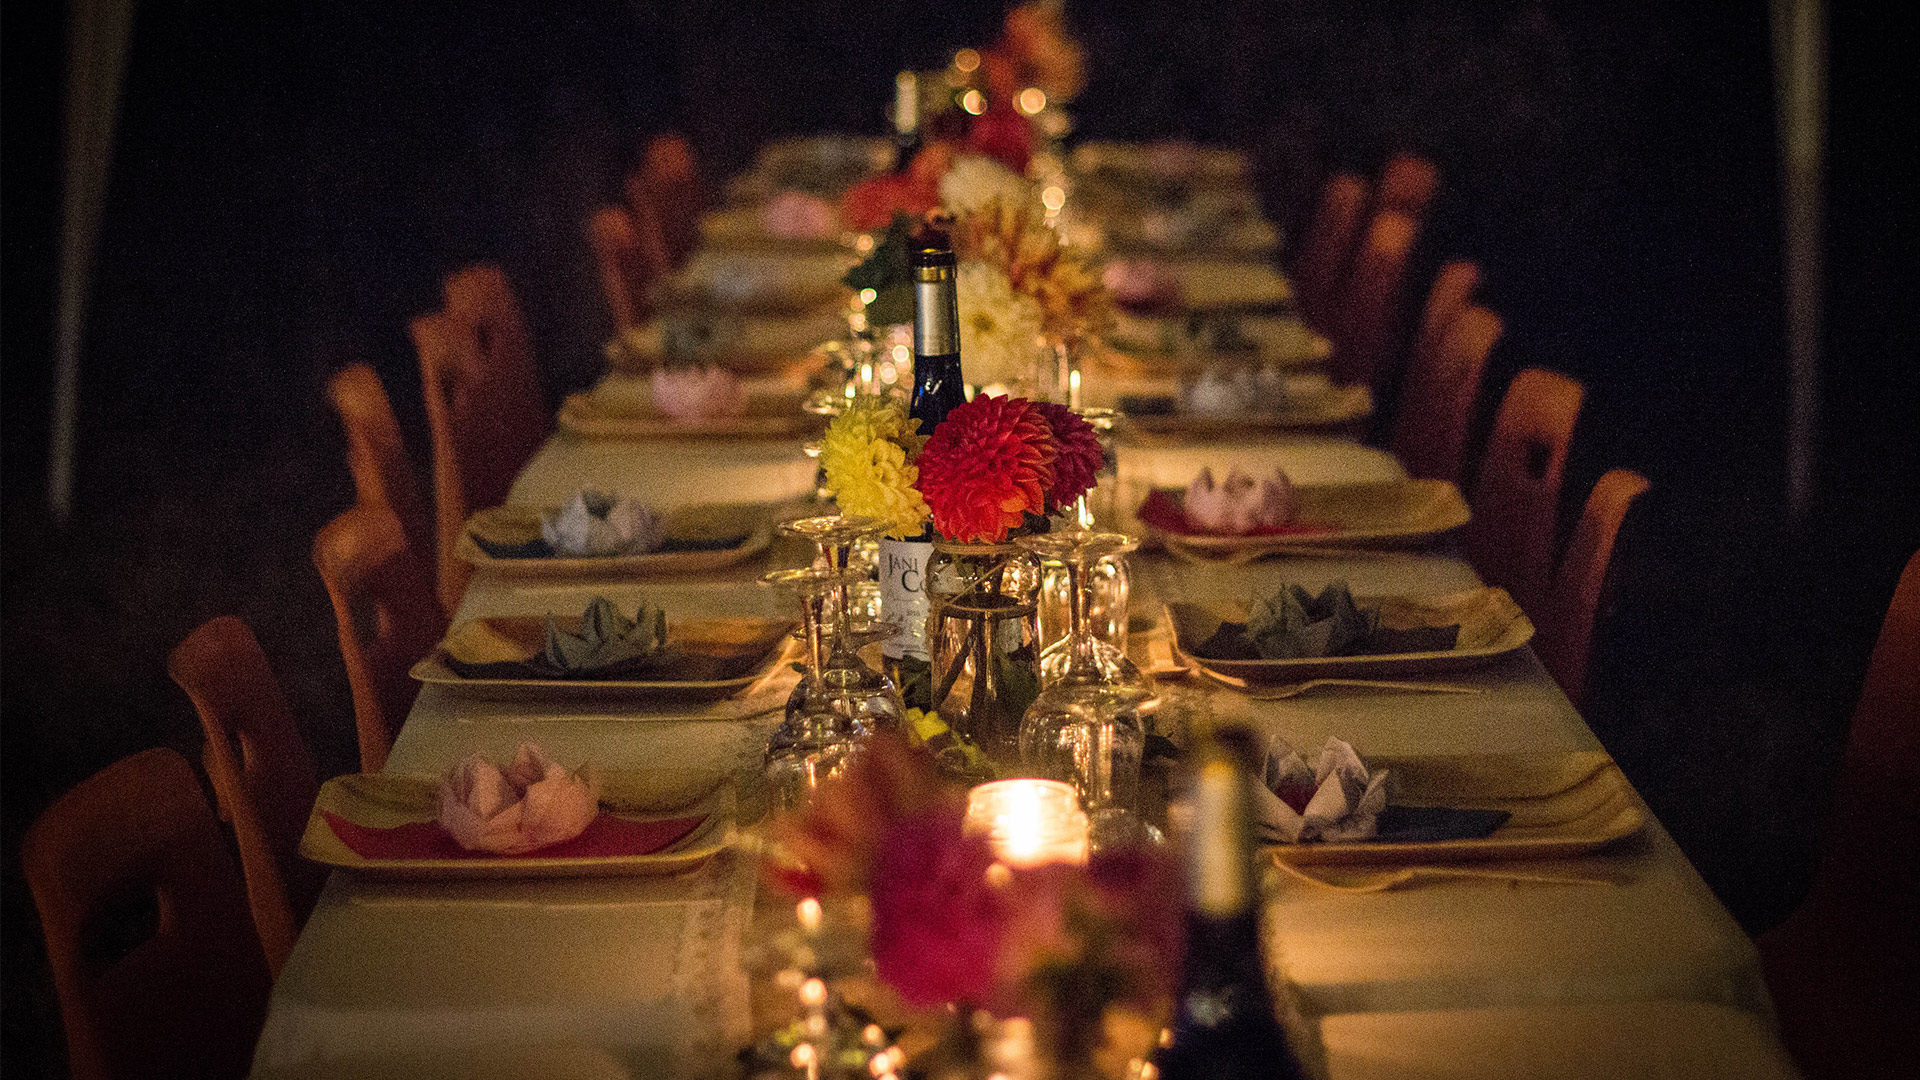 a banquet table set with flowers and warm candles